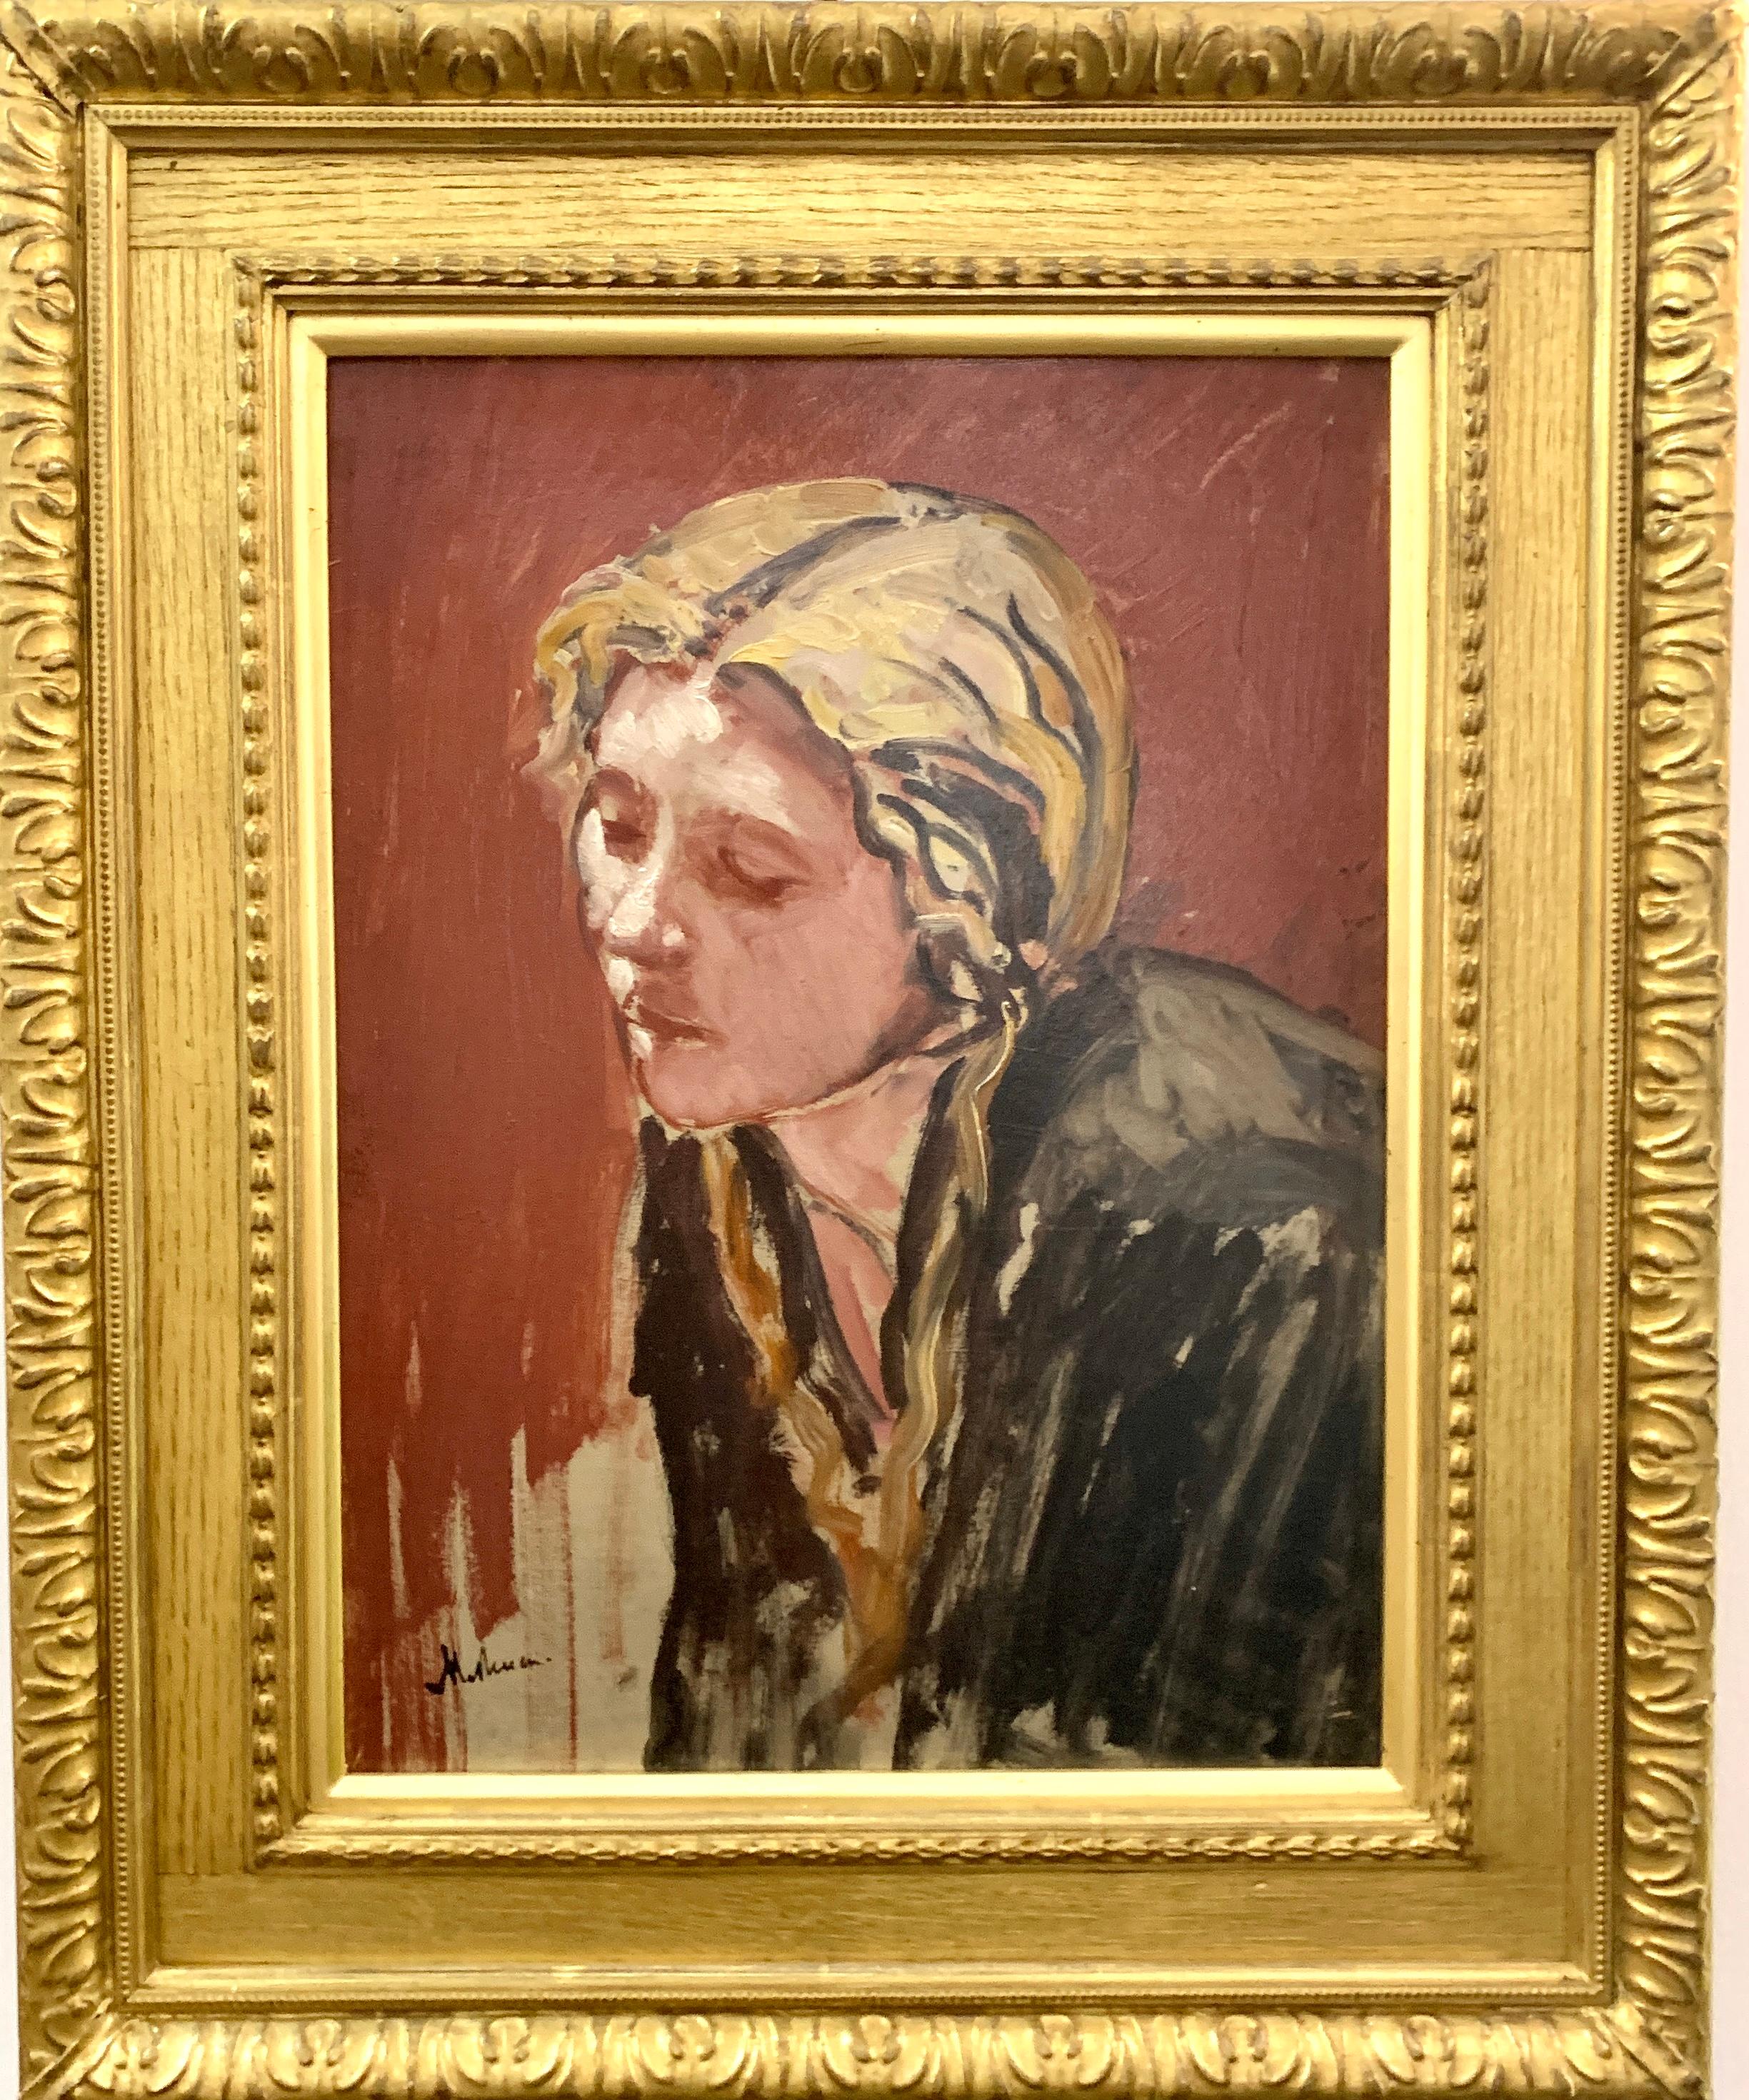 Lord Methuen Portrait Painting - English 20th century portrait of a blond haired young girl, Carmen, circa 1932